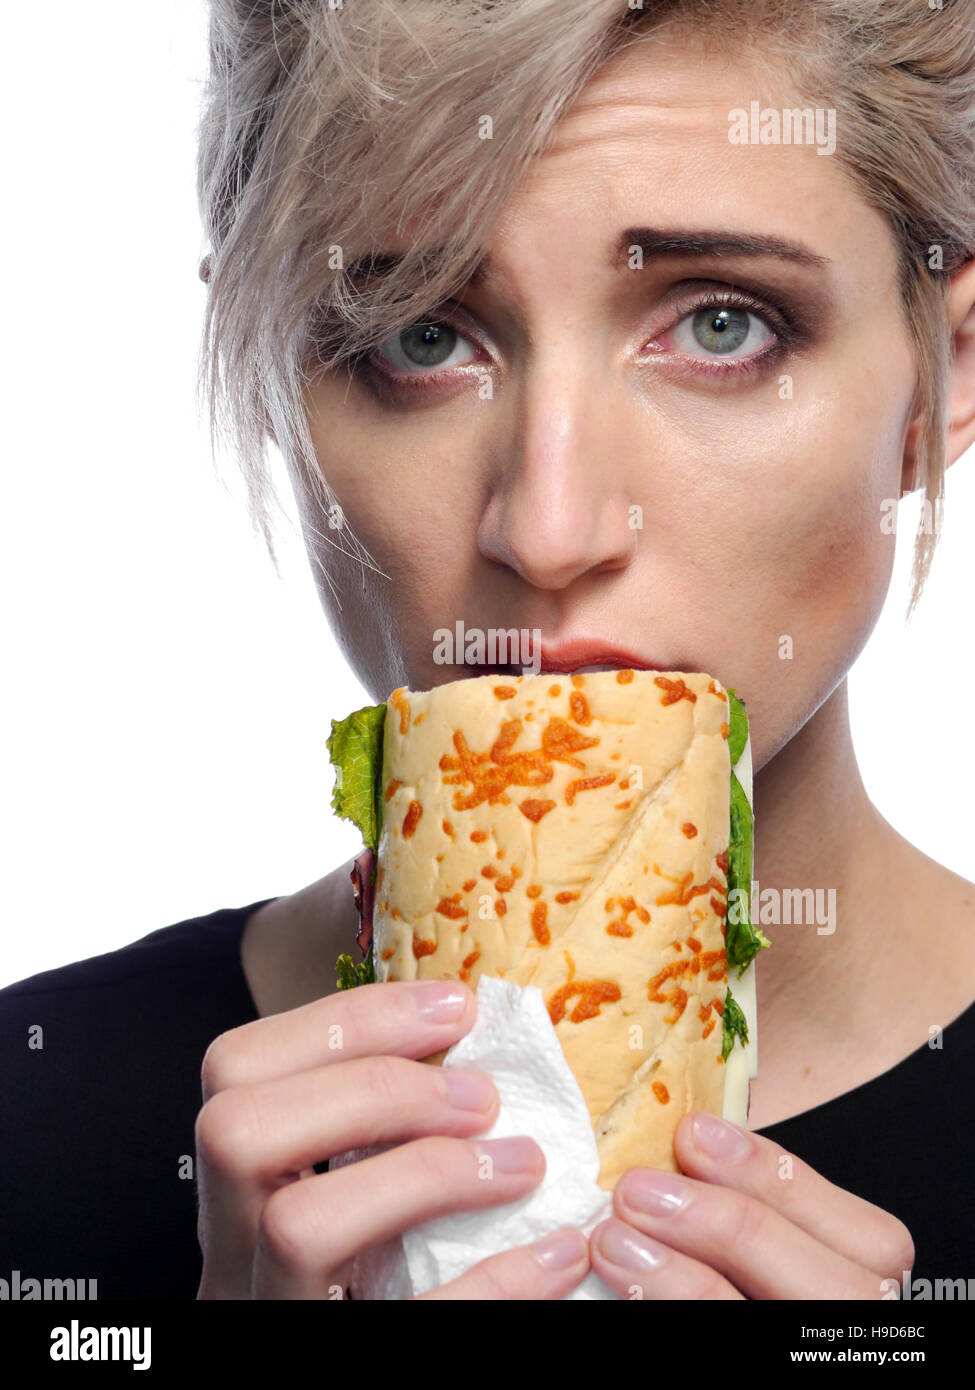 A attractive blonde woman is eating a deli style sandwich Stock Photo